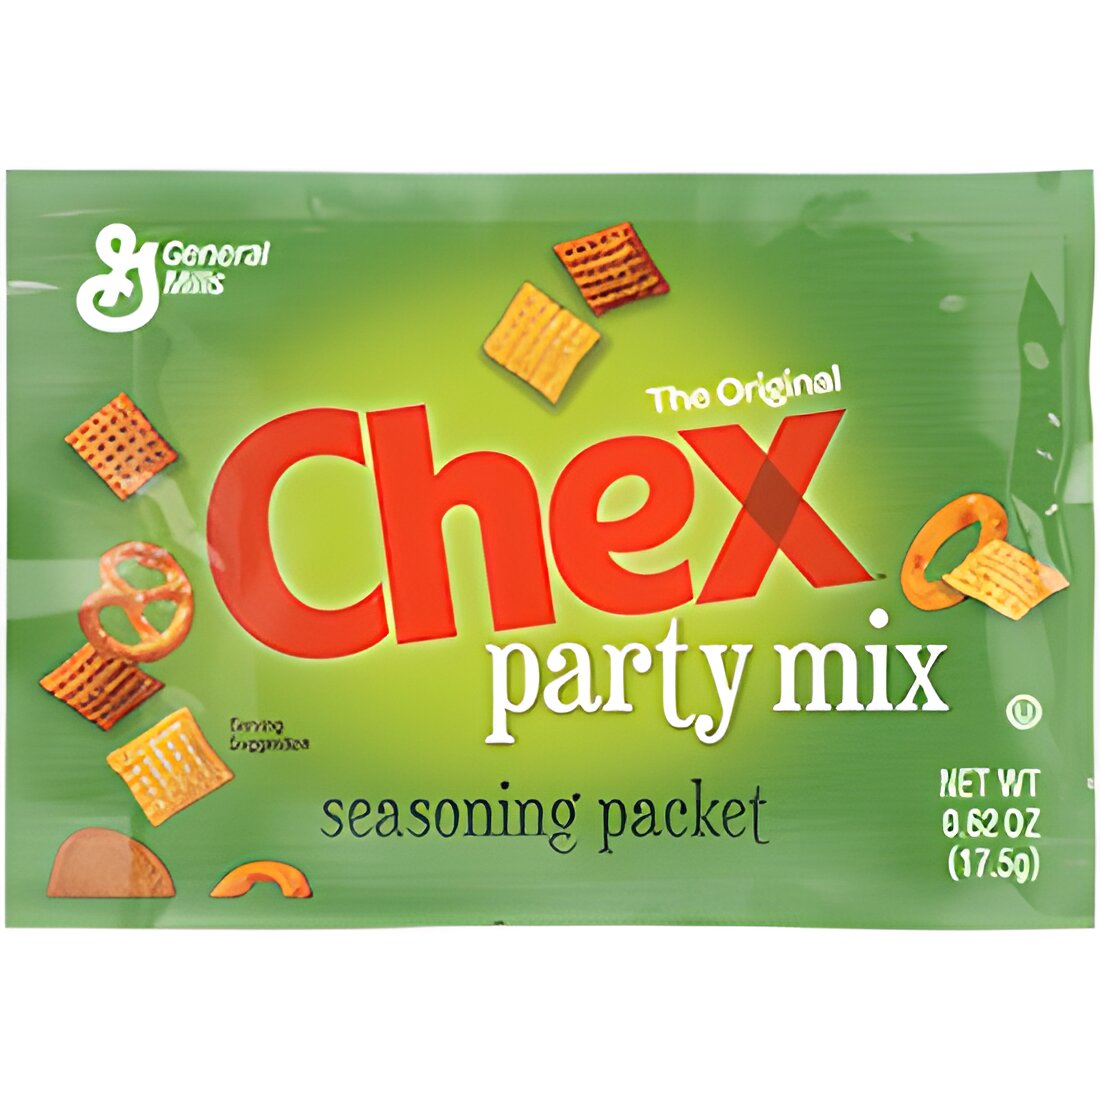 Free Chexâ„¢ Party Mix Seasoning Packet